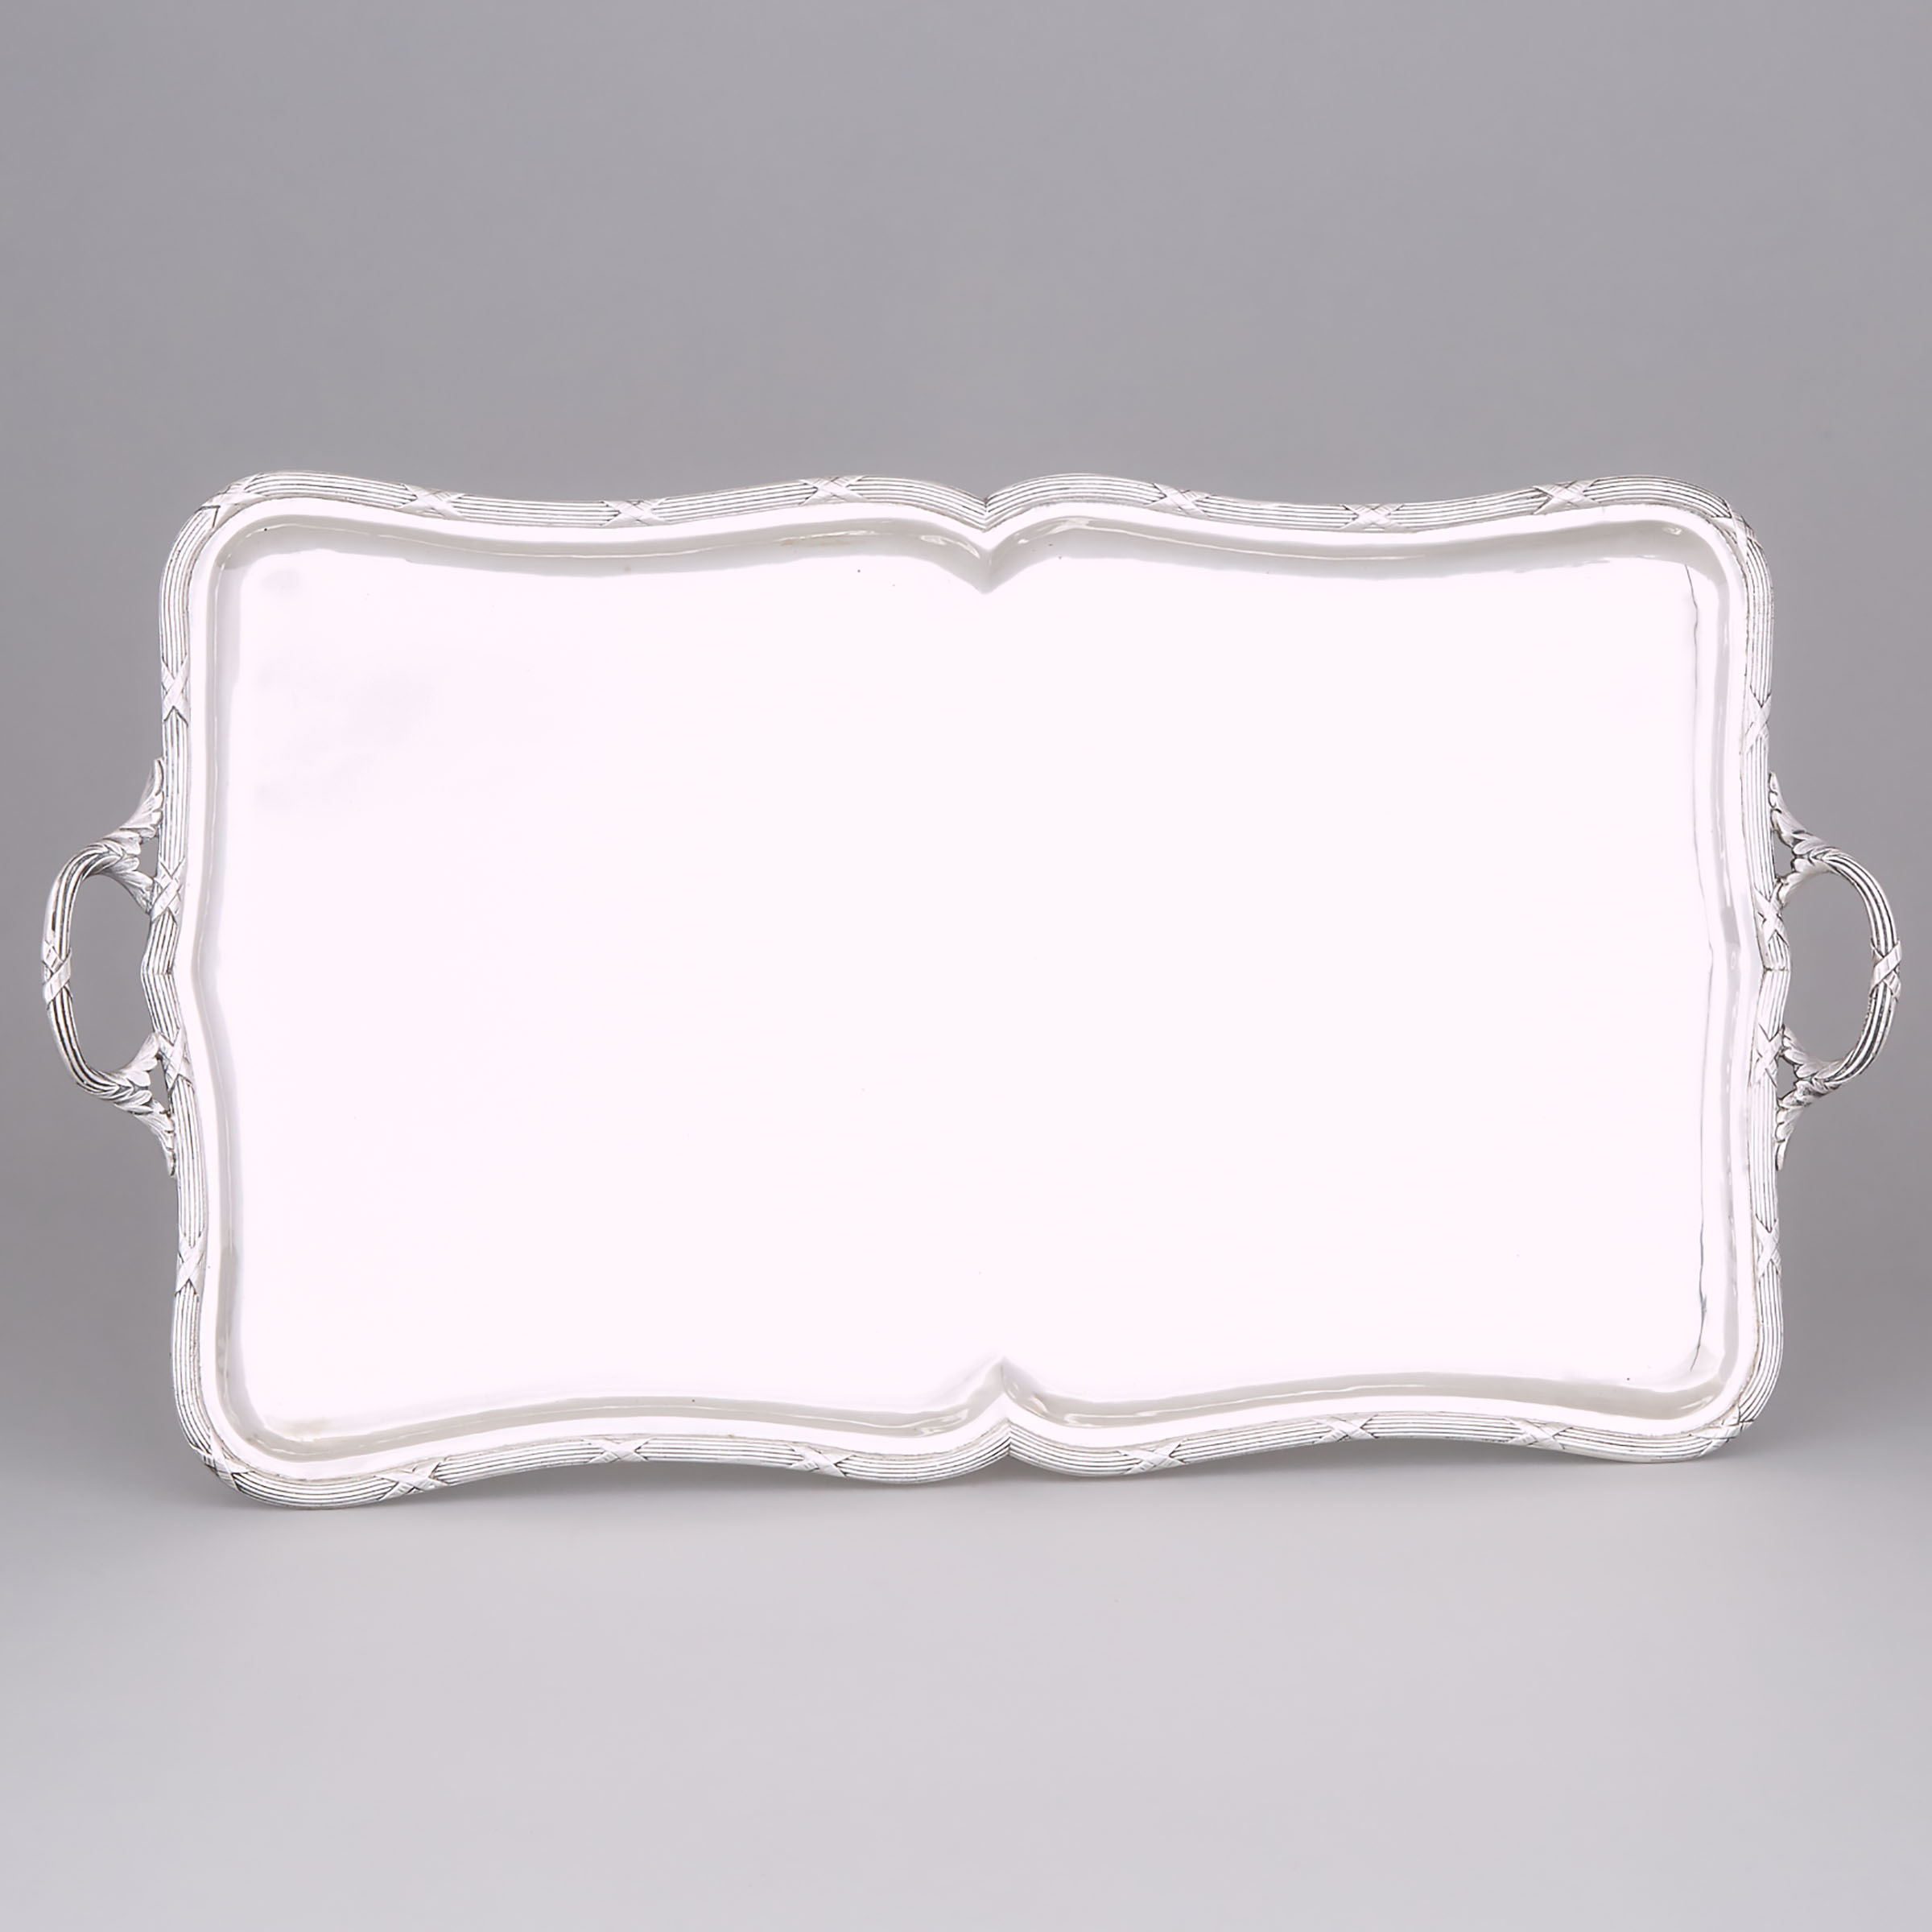 Middle-Eastern Silver Two-Handled Shaped Rectangular Serving Tray, 20th century